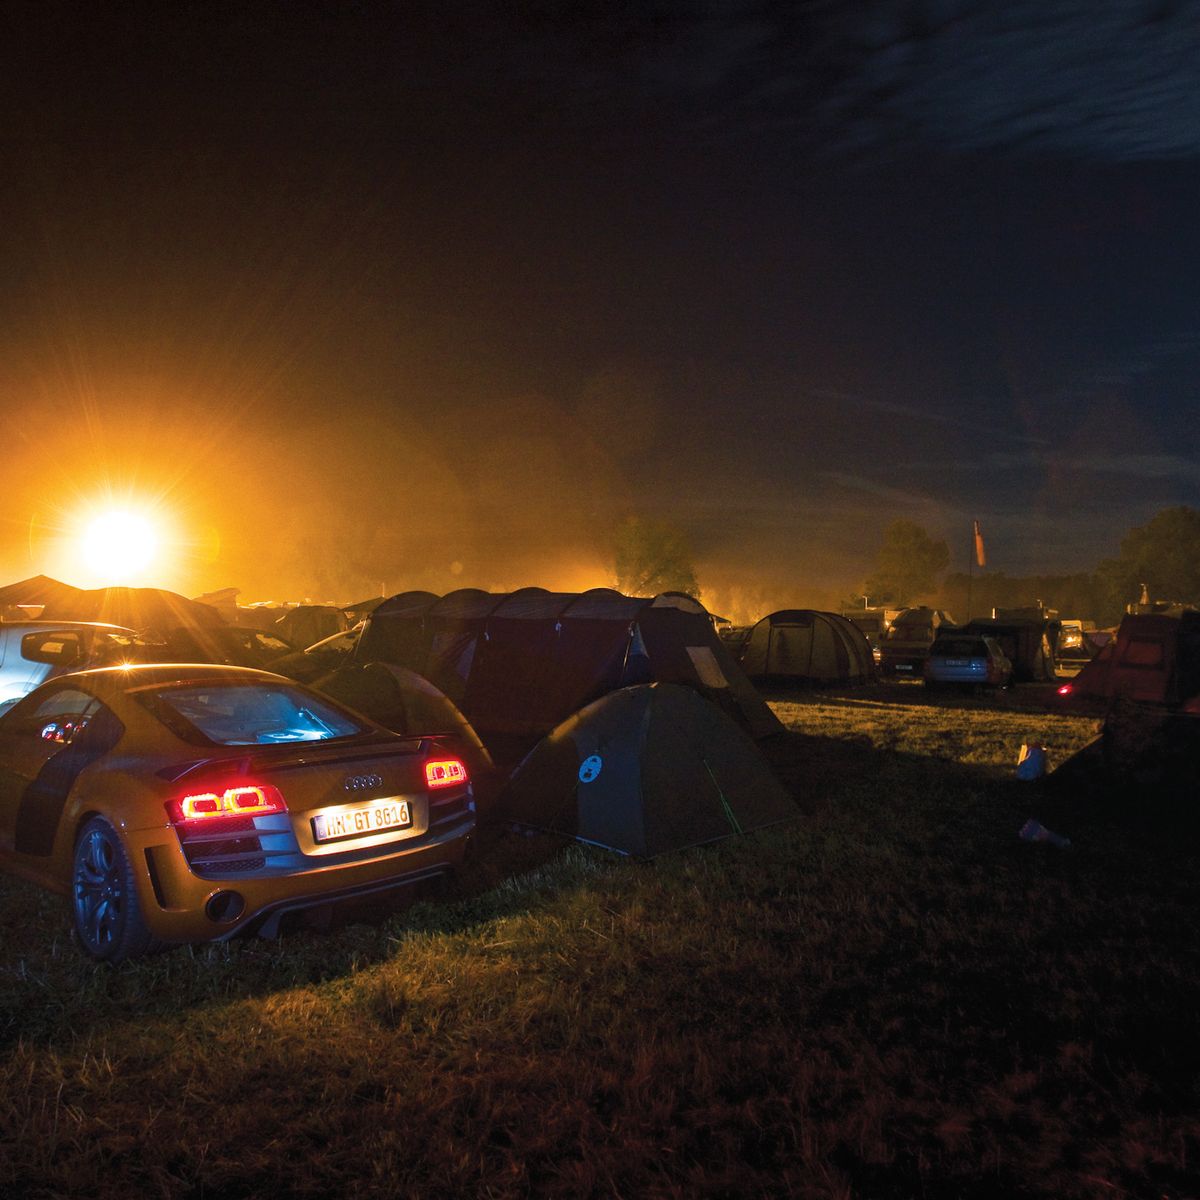 Porsche's new camping accessory turns its cars into tents - The Spaces